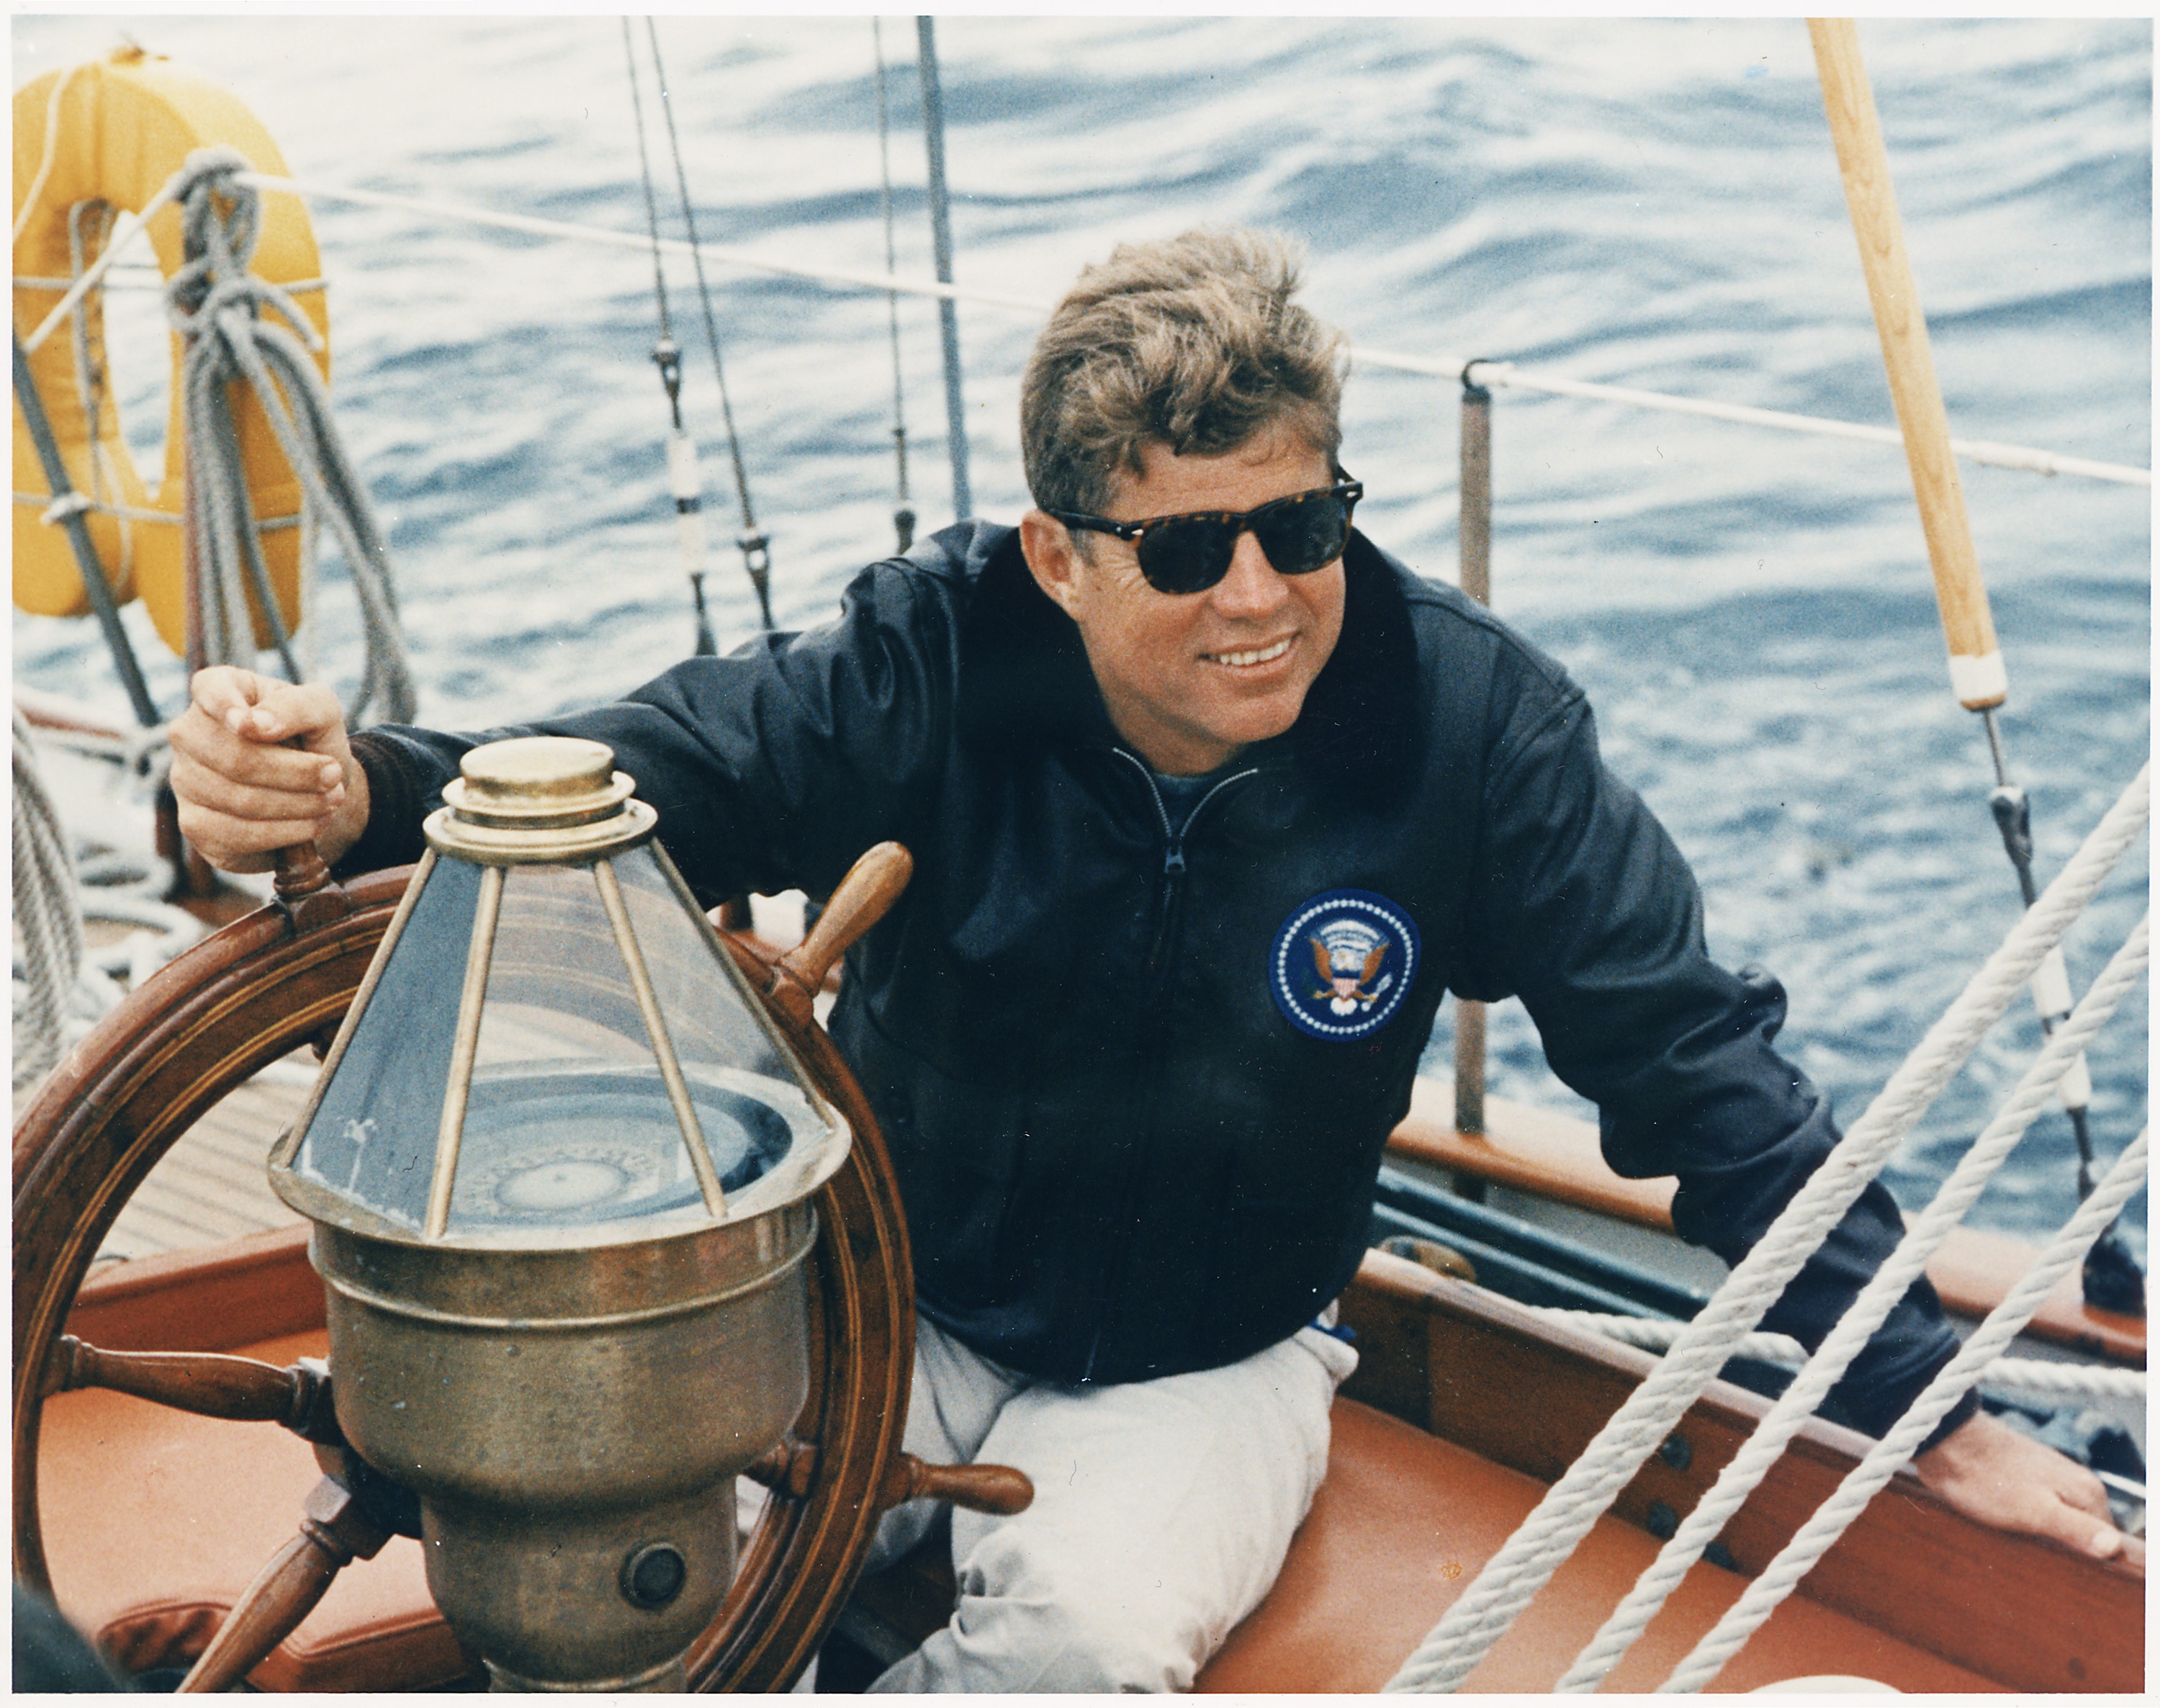 President Vacations in Maine. At the wheel of the US Coast Guard Yacht 